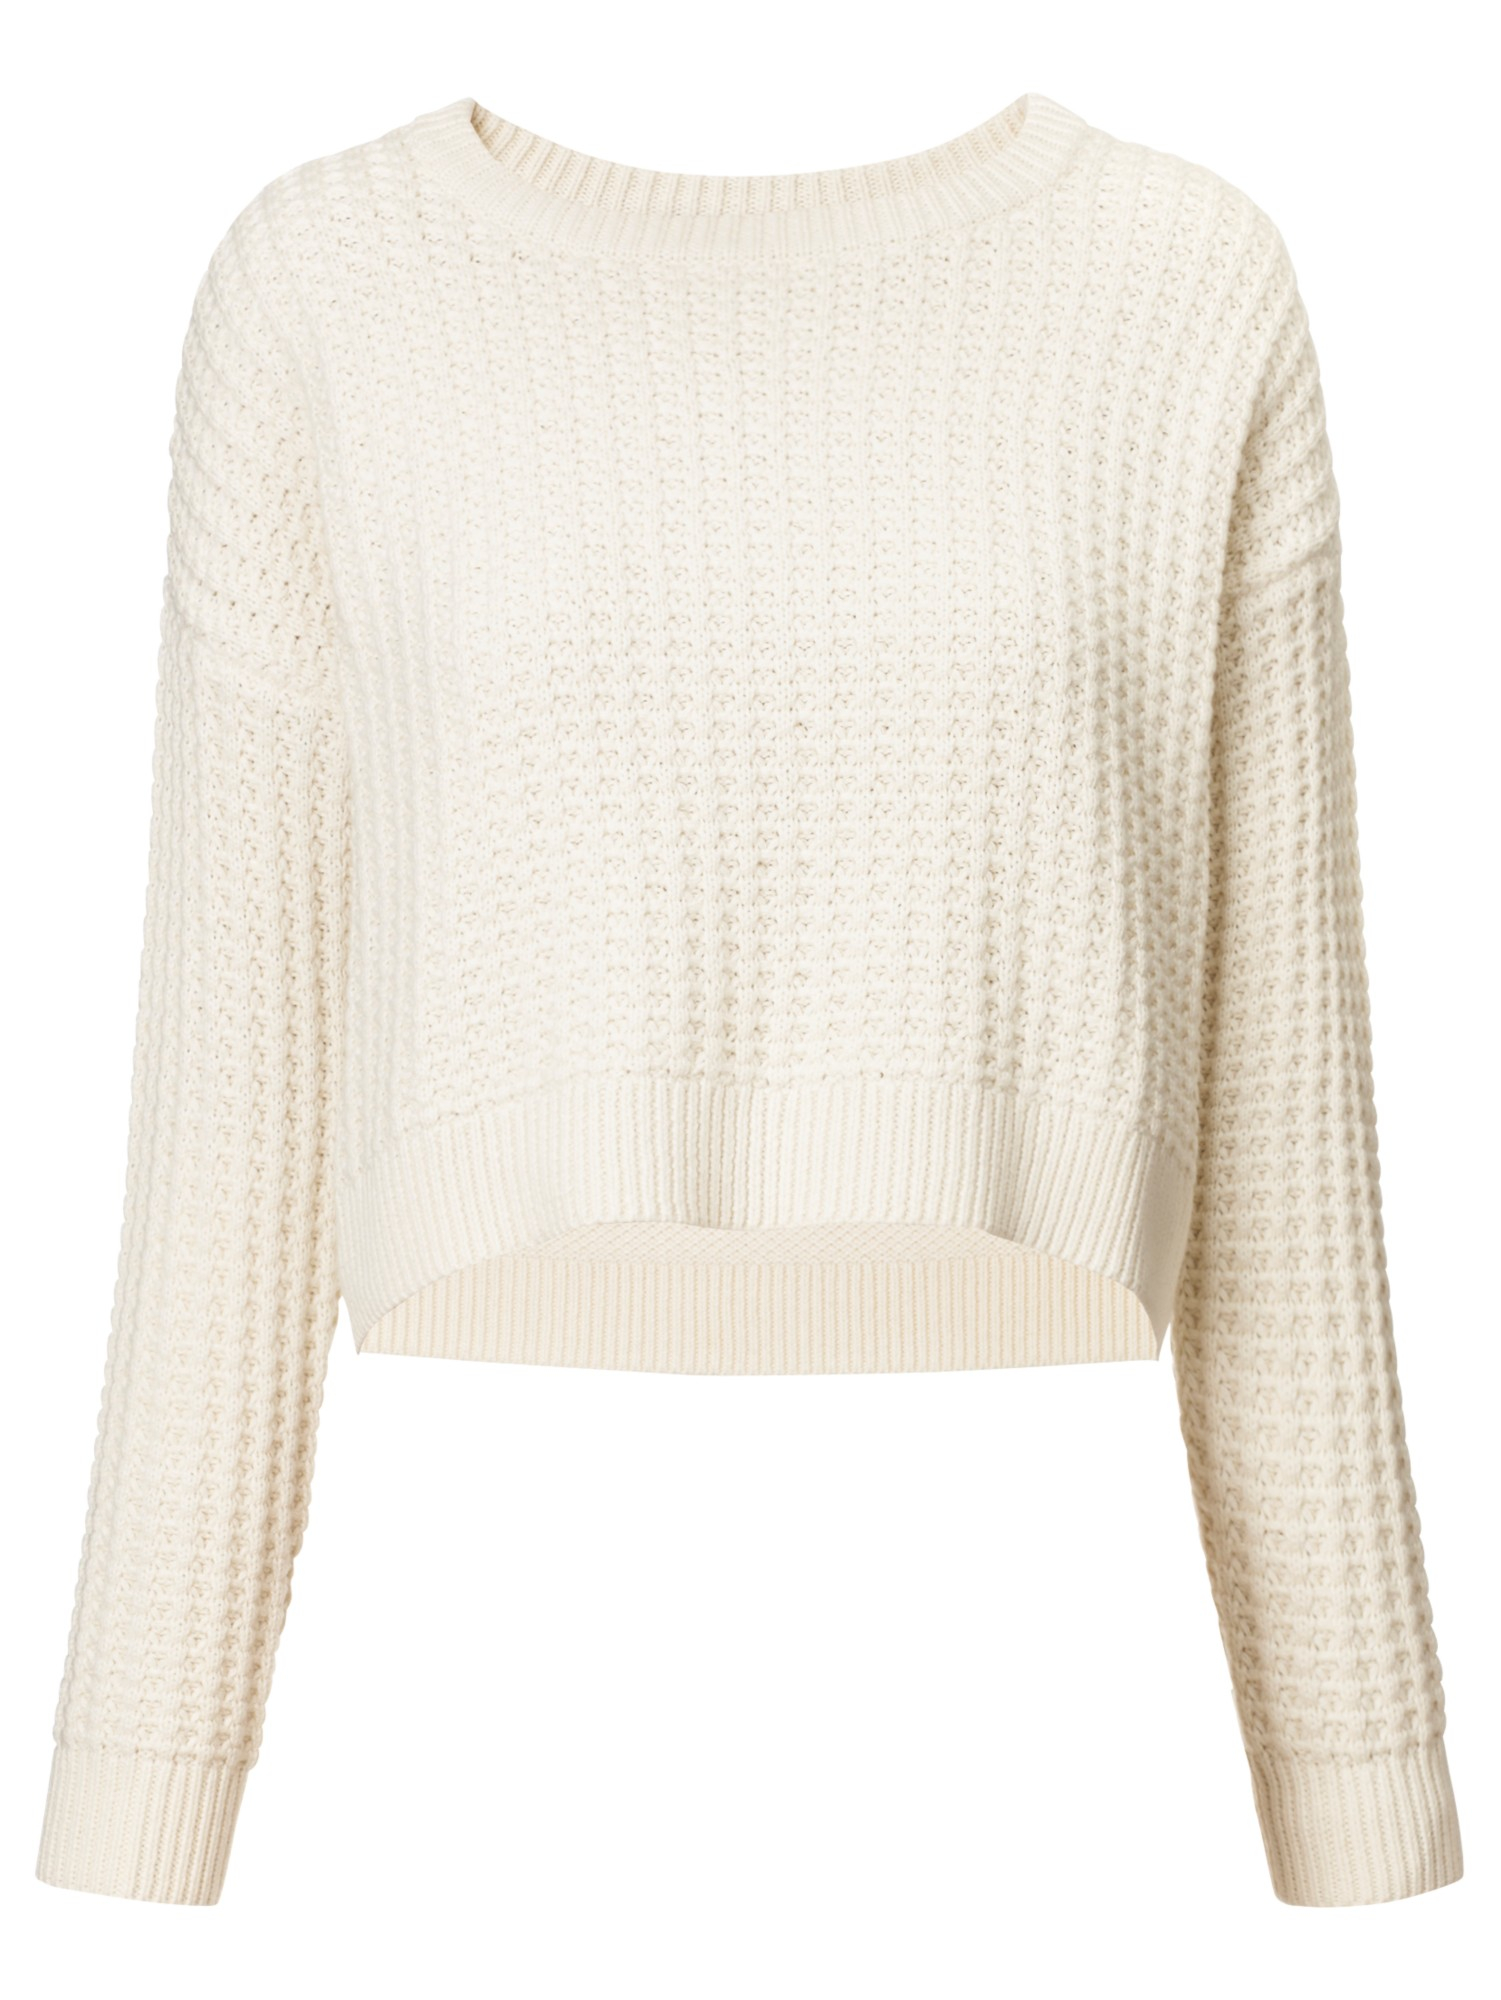 Whistles Willa Cropped Stitch Knit Jumper in White (Ivory) | Lyst